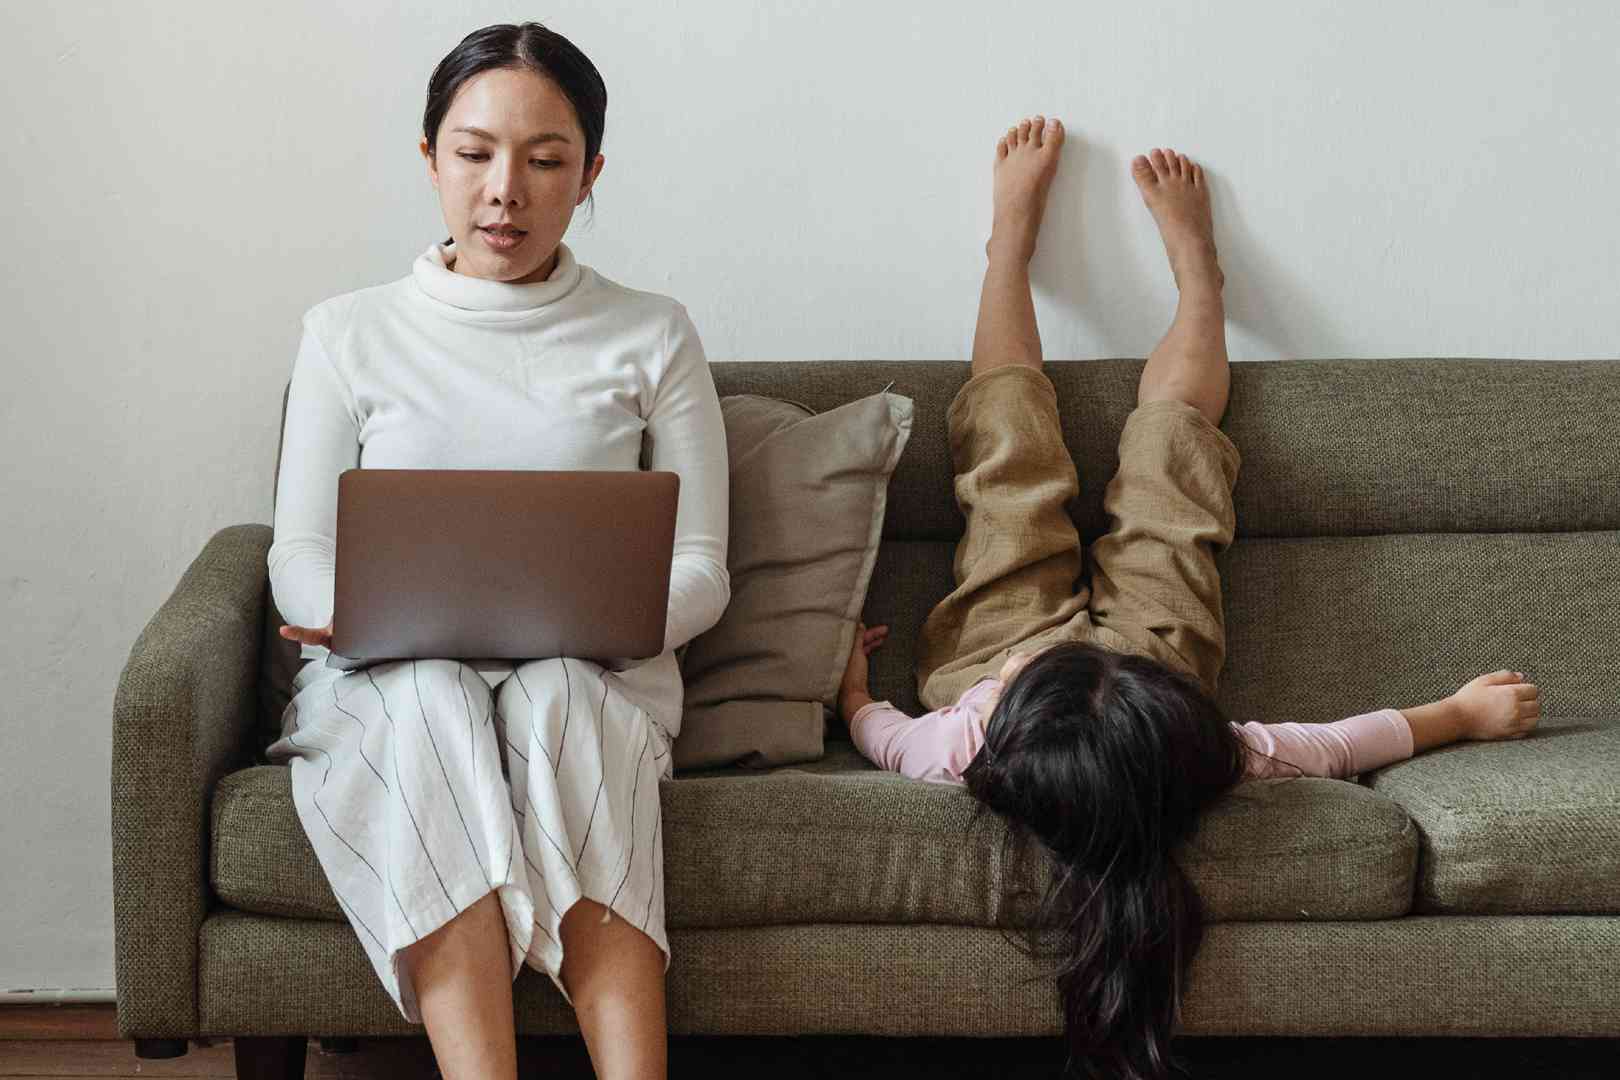 A woman sitting on the couch with her laptop and a child laying down.